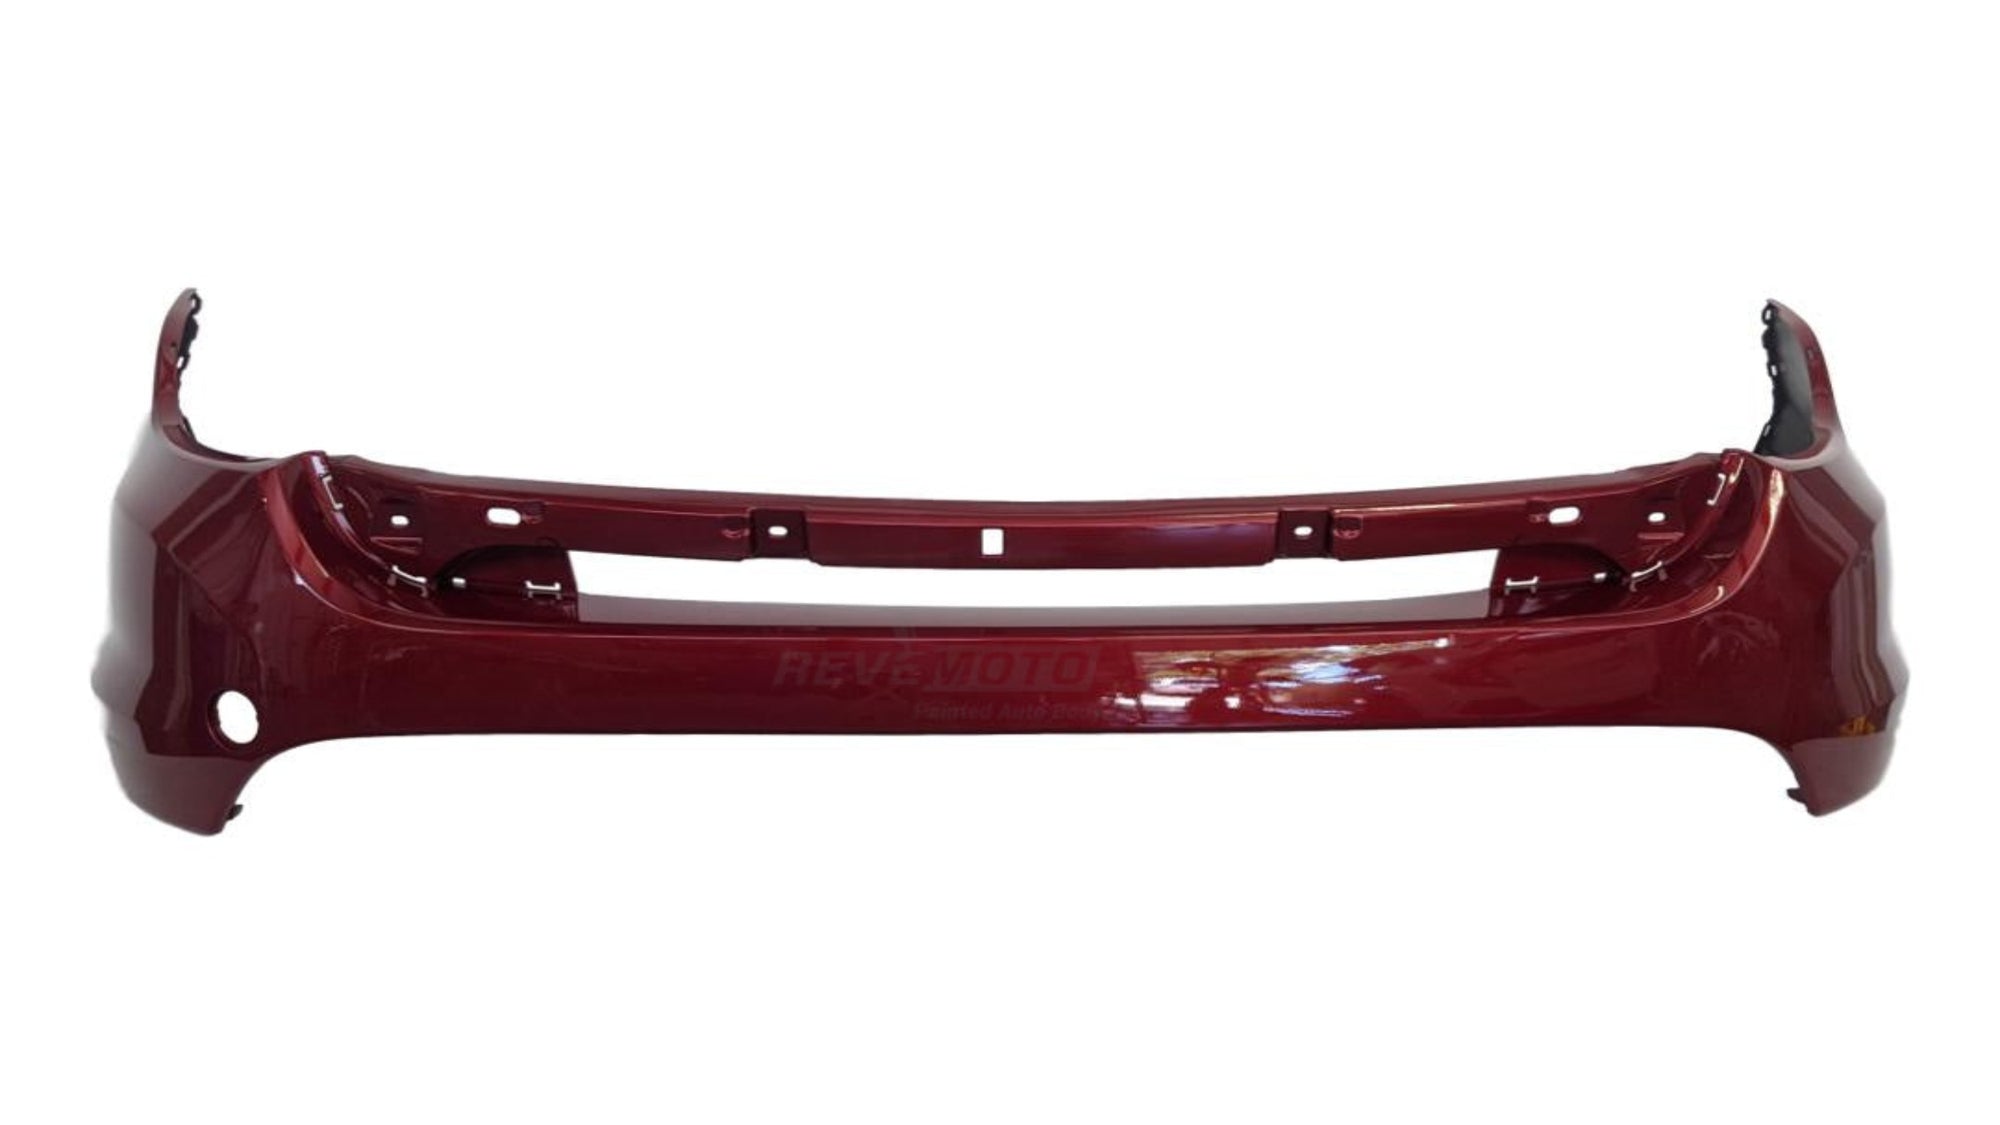 2011-2015 Ford Explorer Front Bumper Painted Ruby Red Metallic (RR) | Upper | WITH: Park Assist Sensor Holes| BB5Z17D957BPTM FO1014108